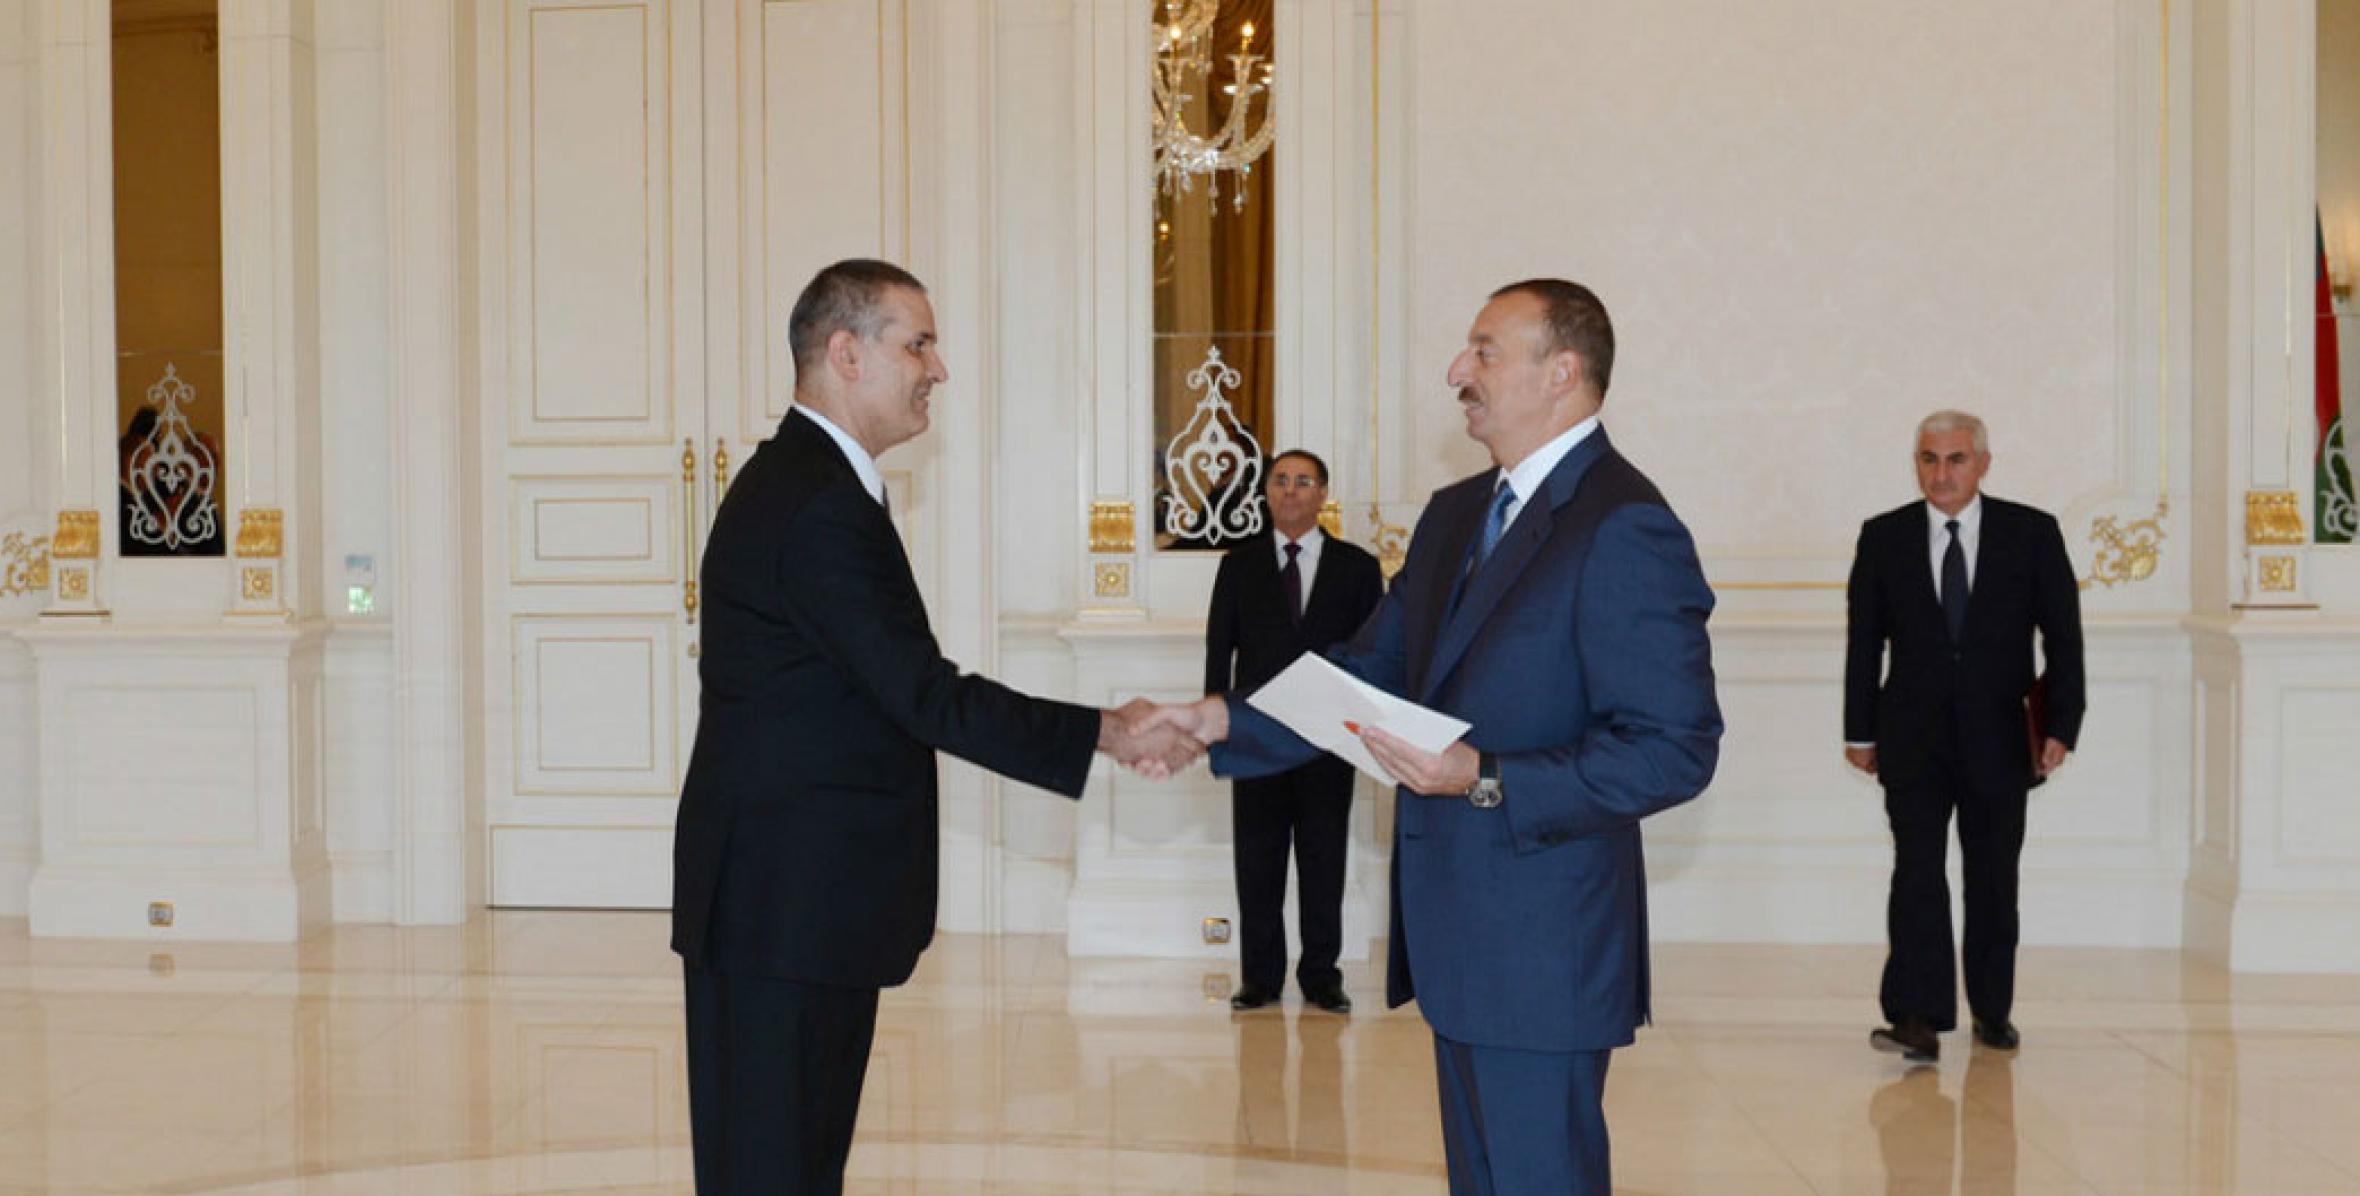 Ilham Aliyev accepted the credentials of the newly-appointed Israeli Ambassador to Azerbaijan